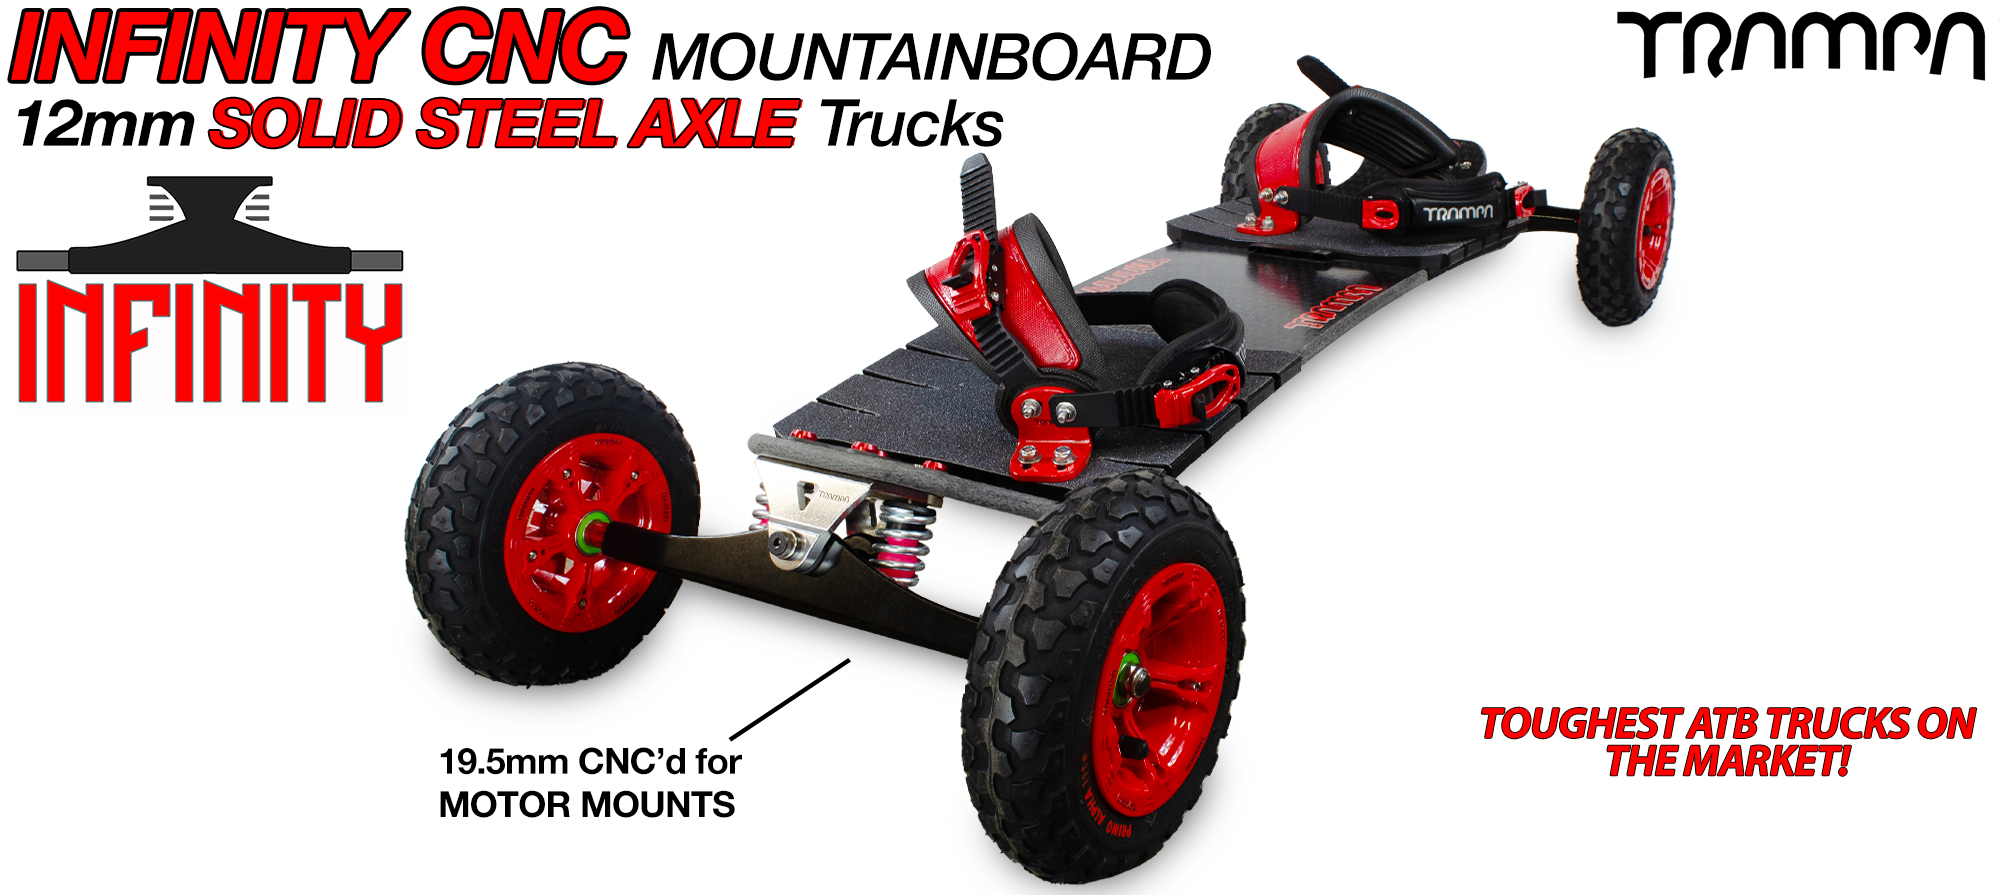 INFINITY Mountainboard CNC - 12mm SOLID Axles  (£500)